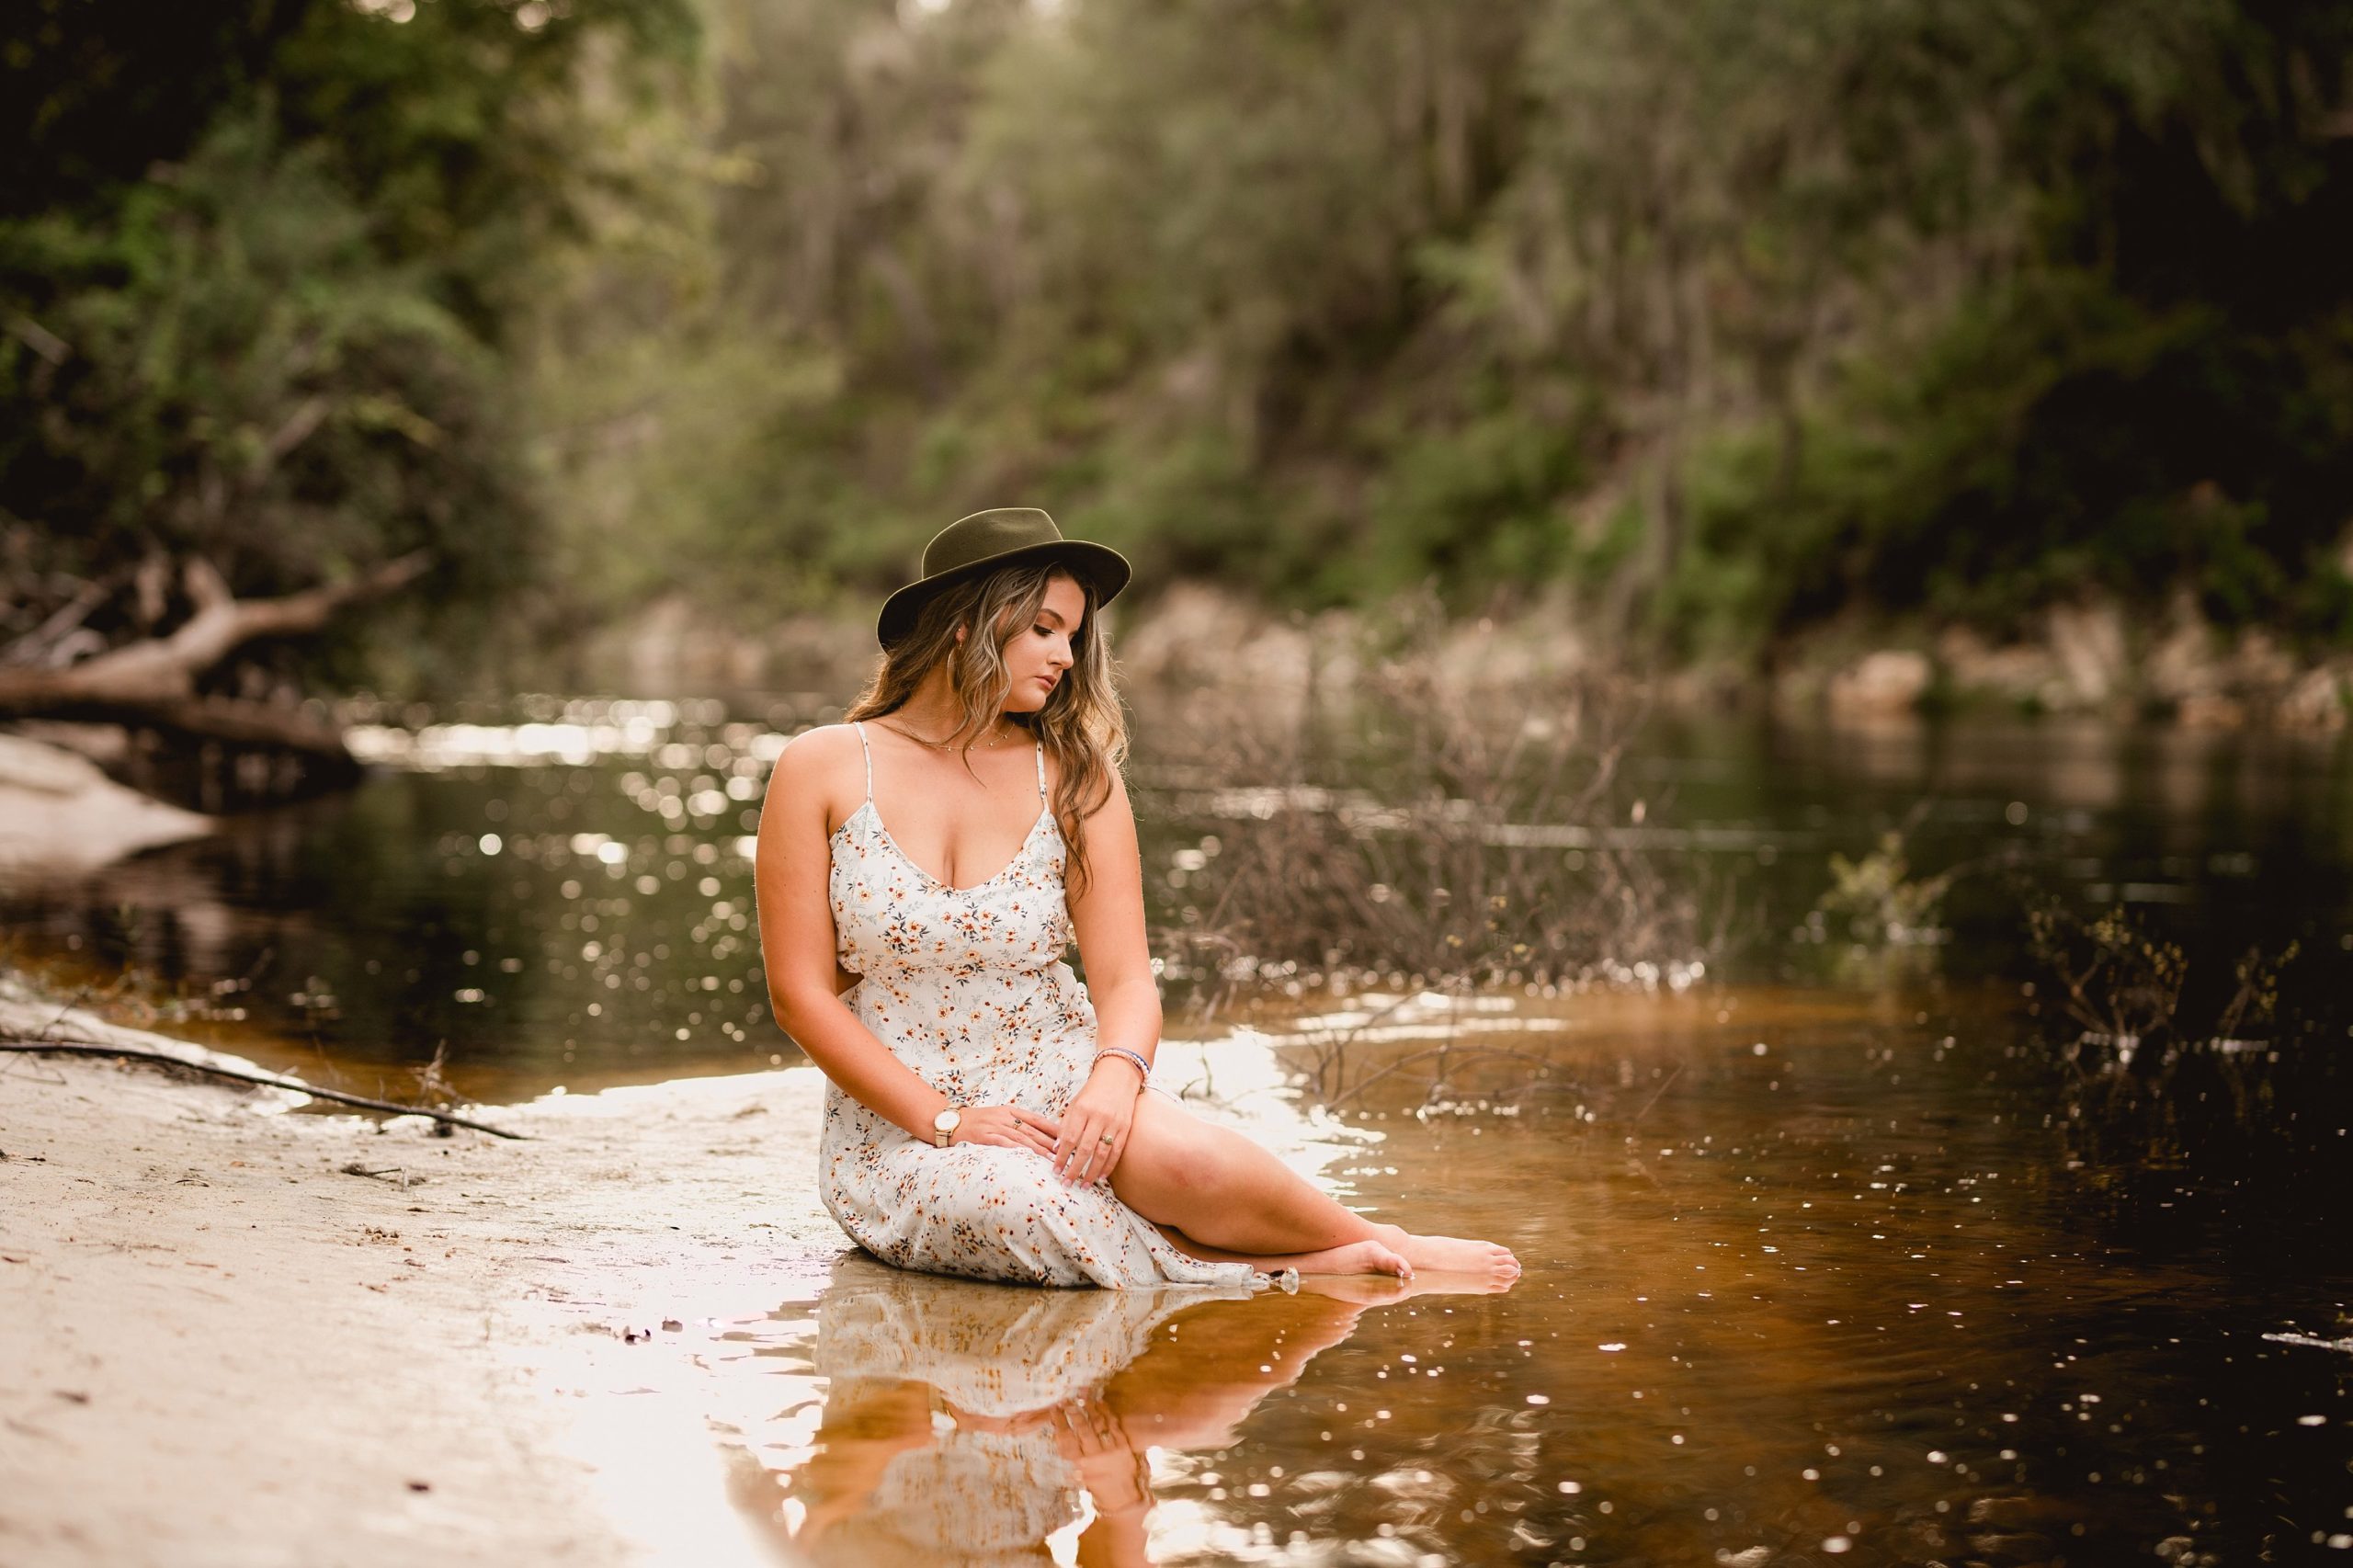 Suwannee River Senior photos by professional photographer in north florida.